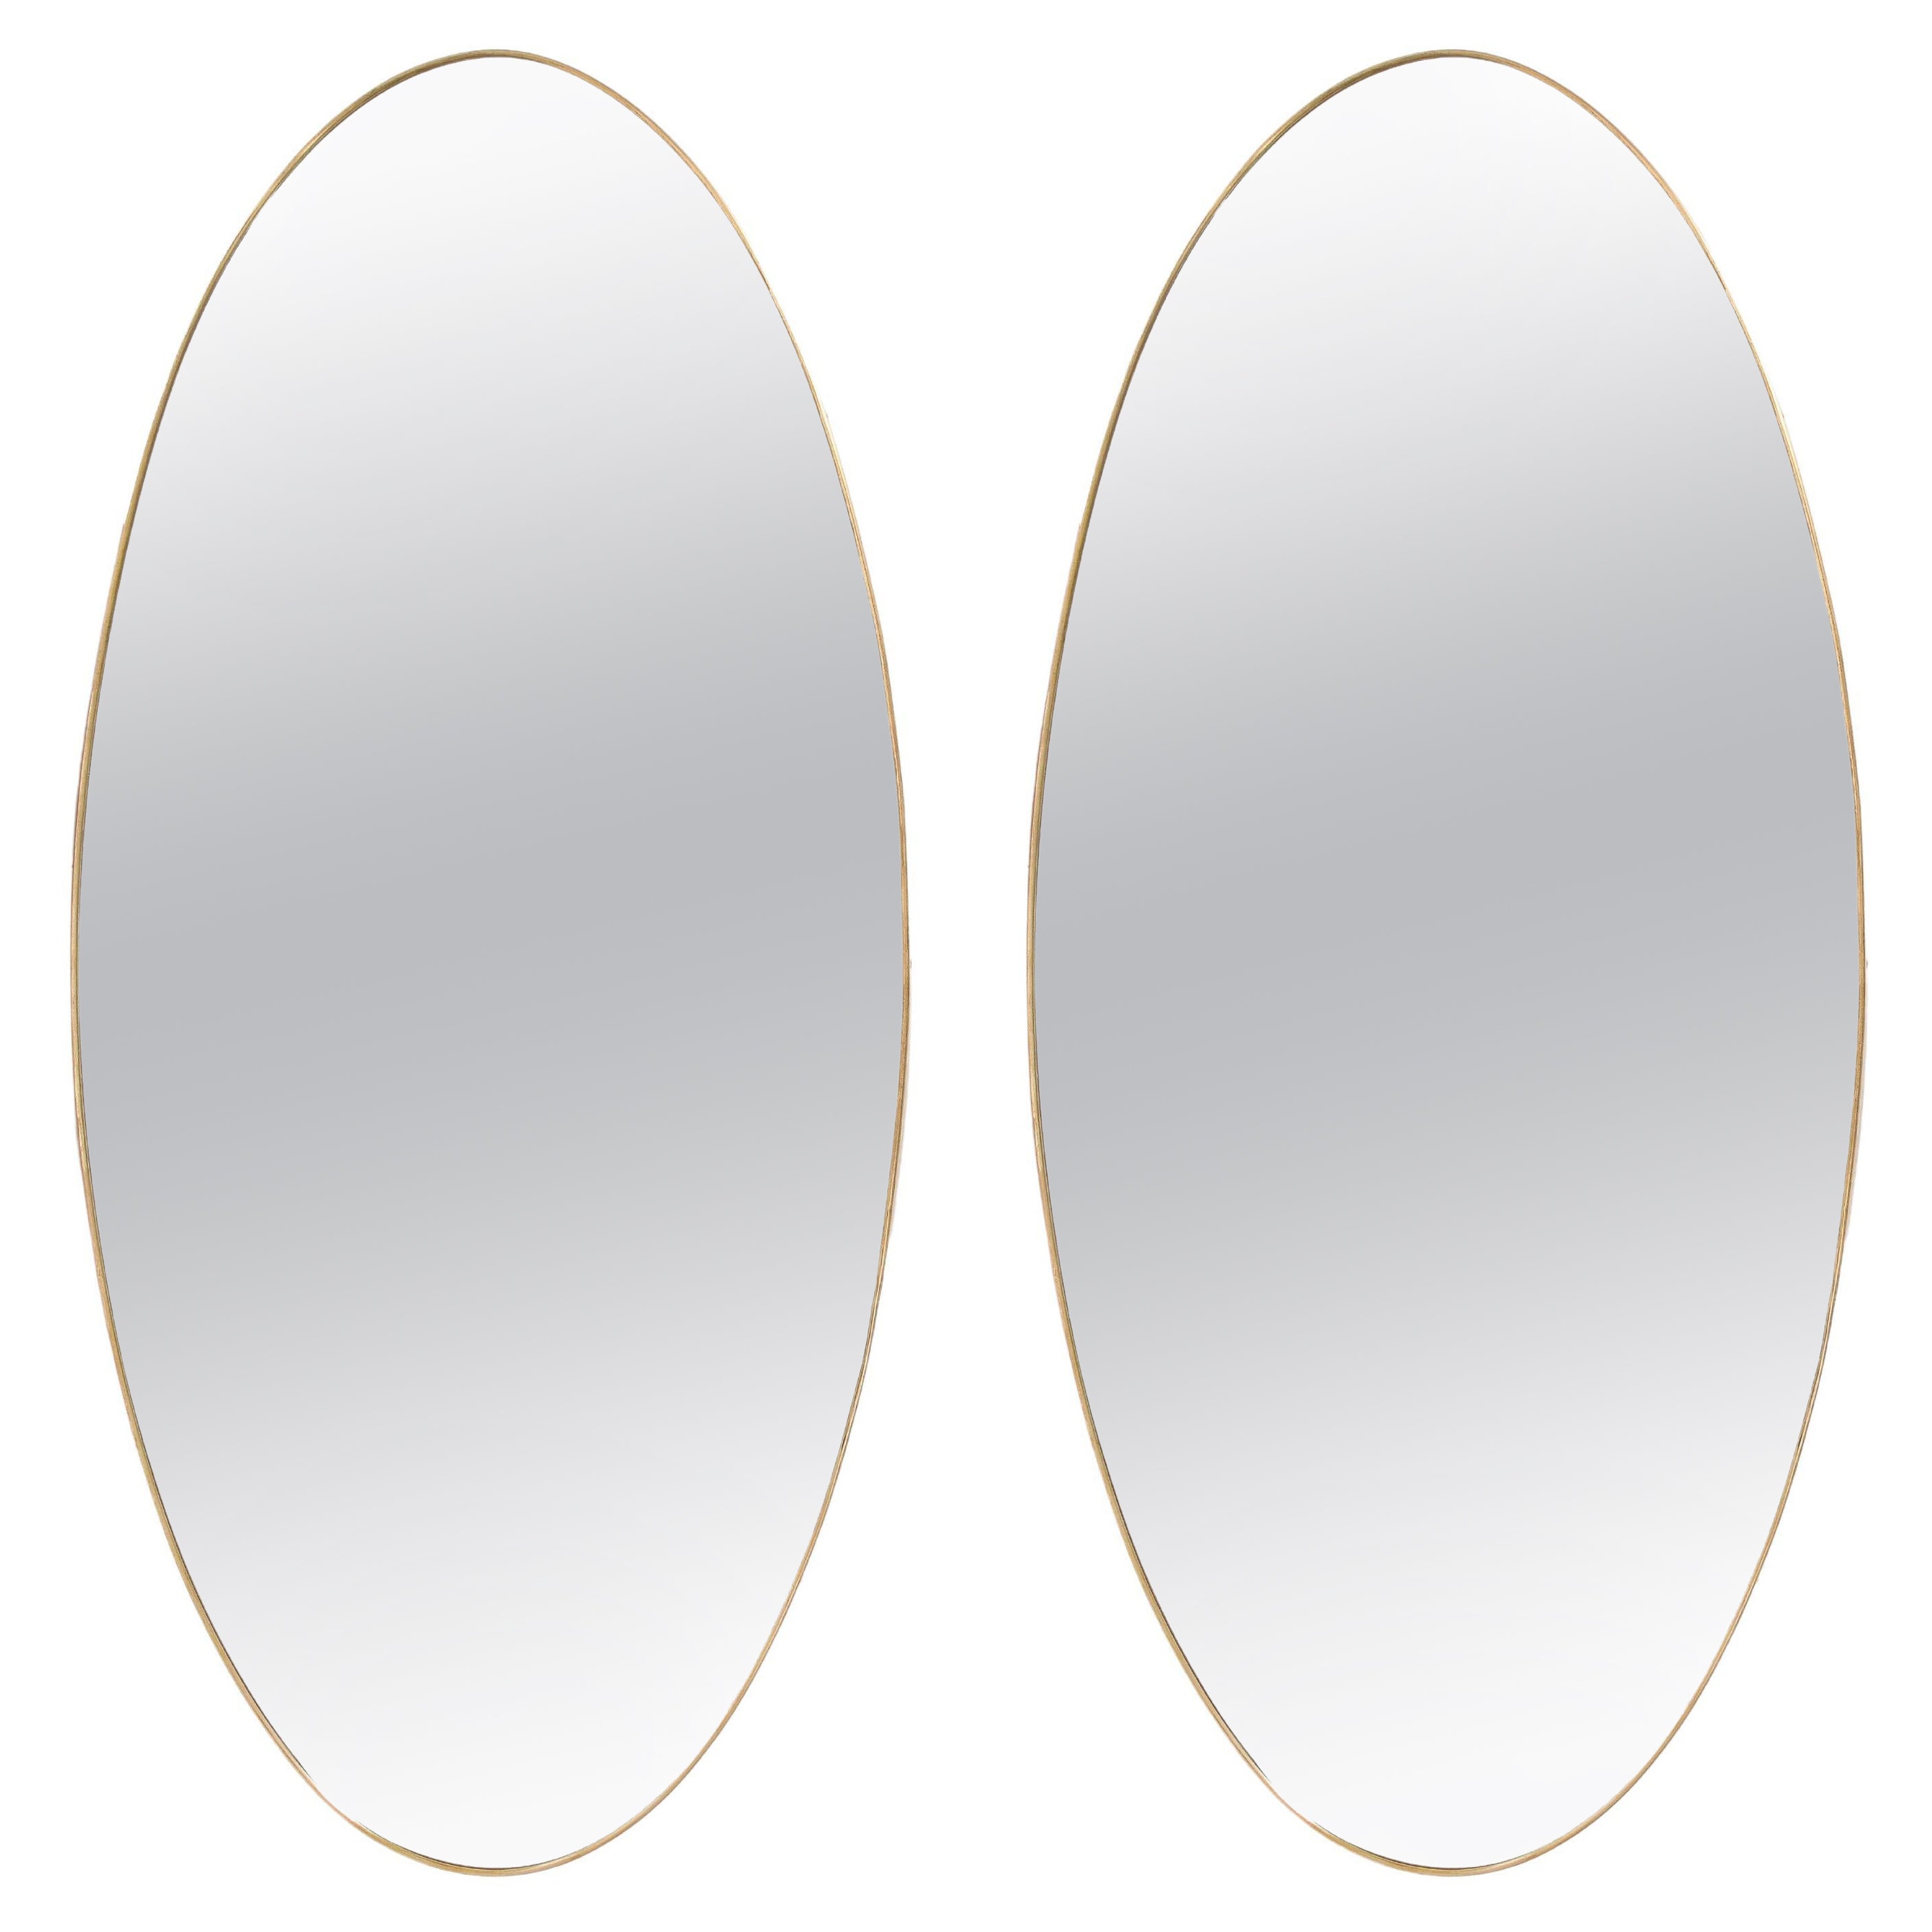 1950s Italian Rare Pair of Grand Scale Oval Brass Mirrors (Paire de miroirs ovales en laiton)